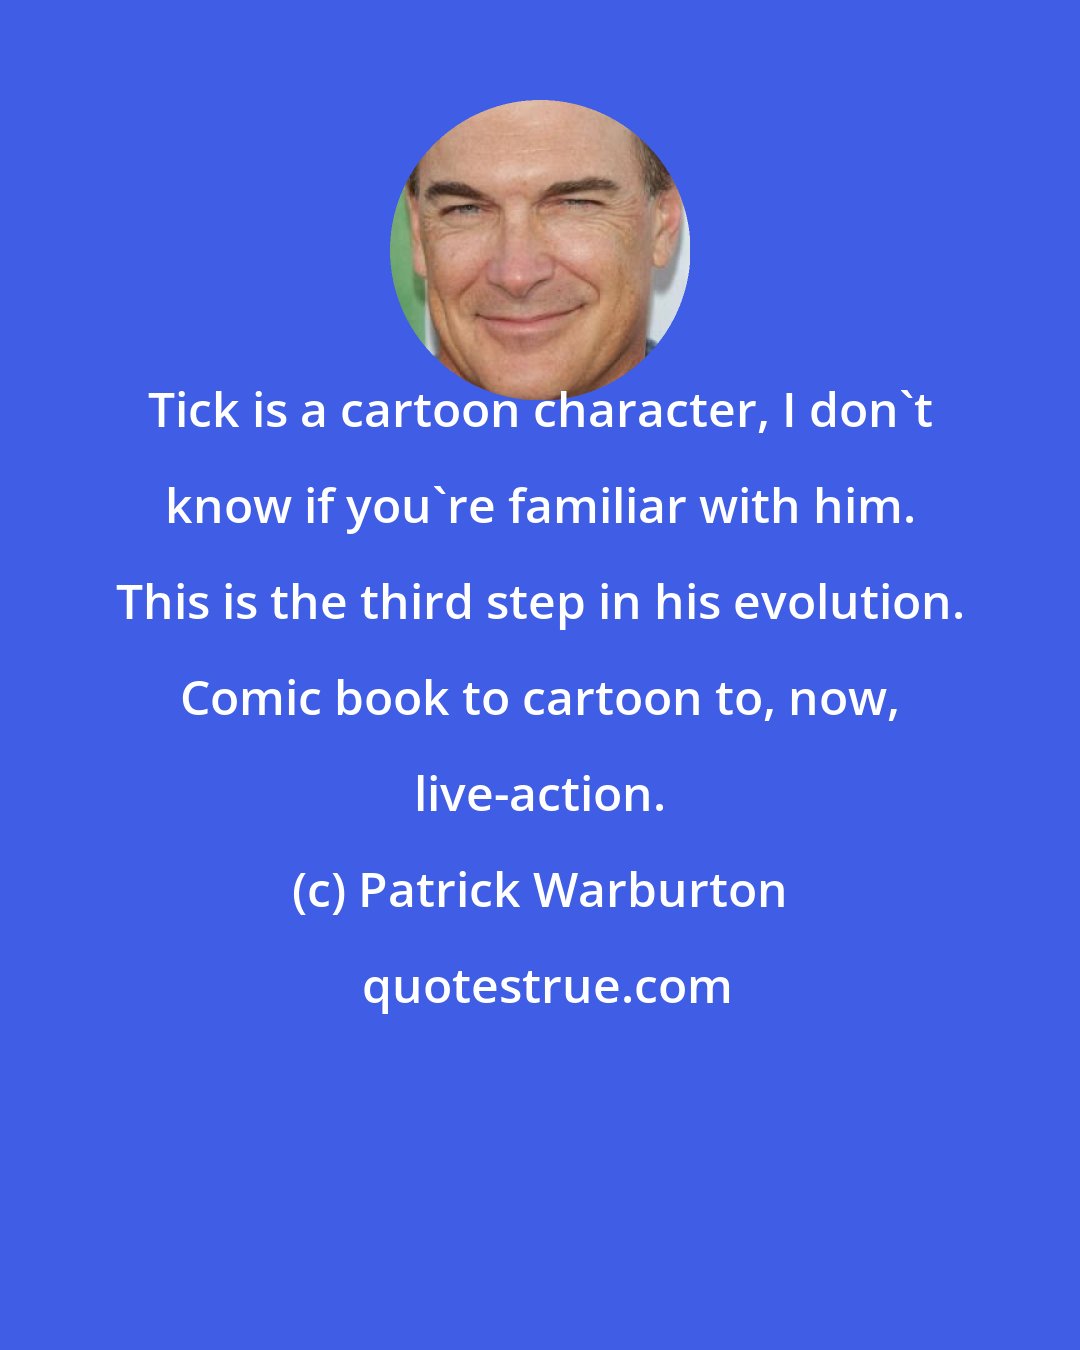 Patrick Warburton: Tick is a cartoon character, I don't know if you're familiar with him. This is the third step in his evolution. Comic book to cartoon to, now, live-action.